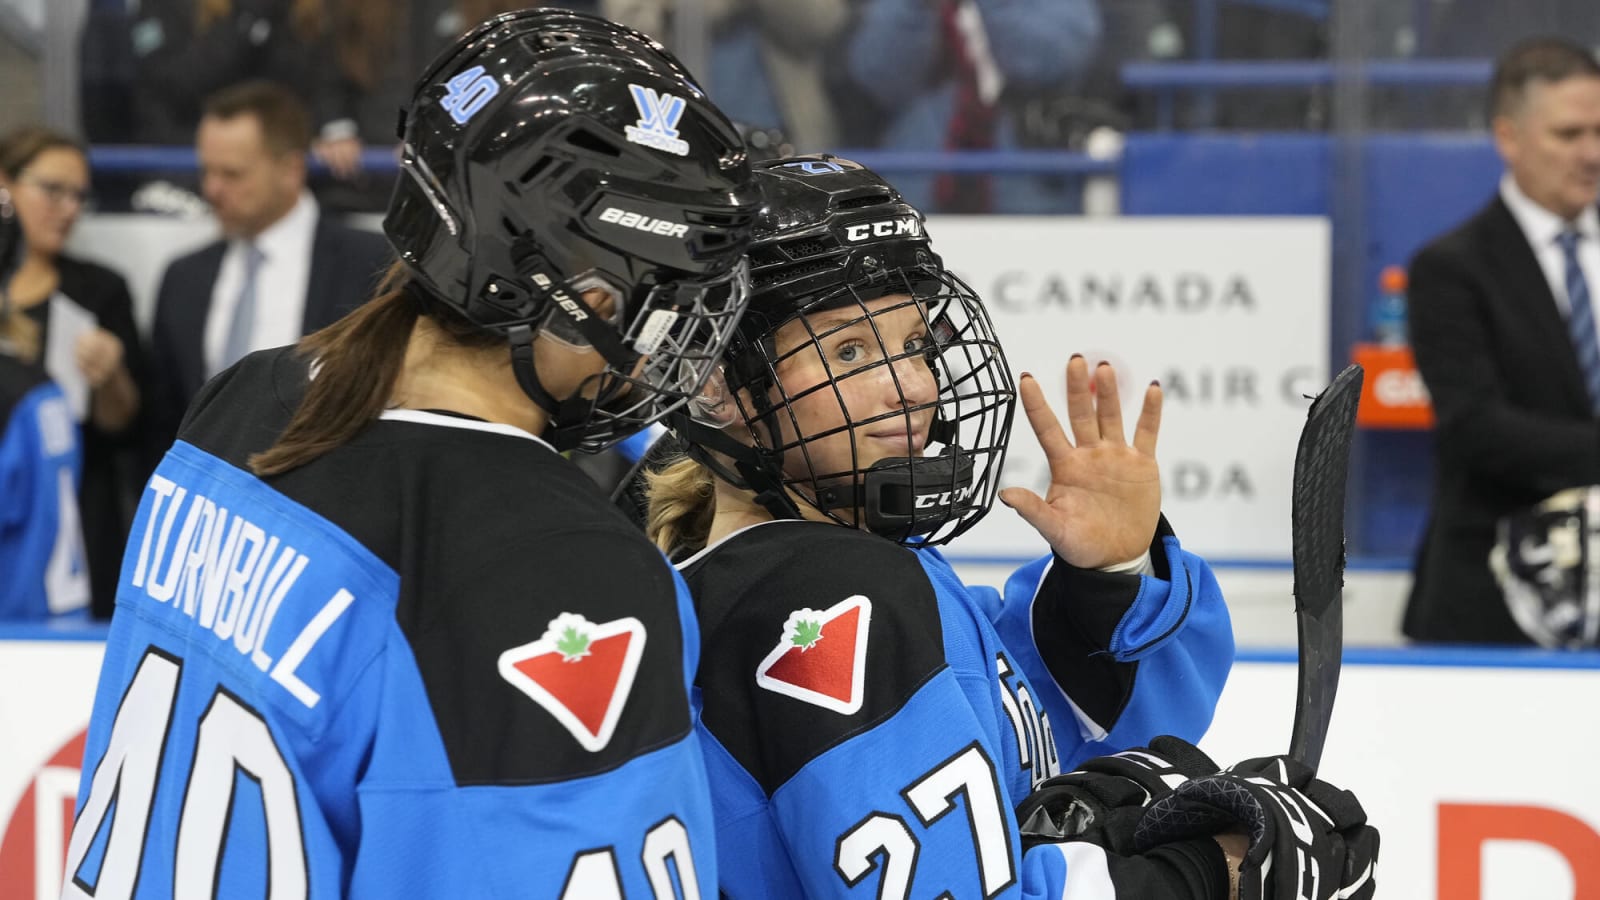 Six burning questions as the PWHL returns: Sellout in Montreal, playoff contenders, race for first place